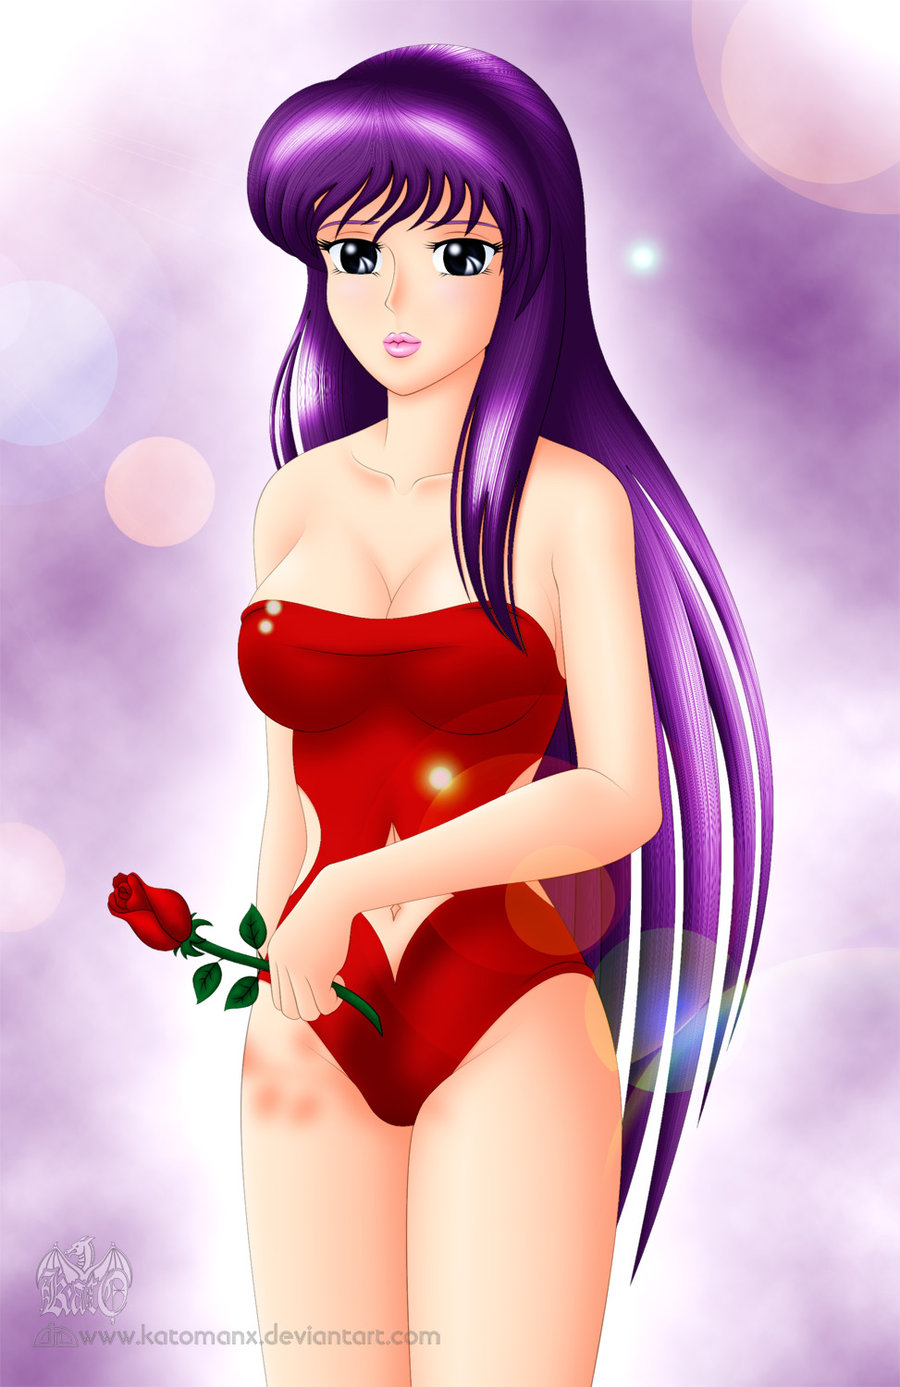 1girl arm arm_at_side arms art athena_(saint_seiya) babe bare_arms bare_legs bare_shoulders big_breasts black_eyes breasts cleavage collarbone deviantart flower holding holding_flower katomanx legs lens_flare lips lipstick looking_at_viewer makeup navel navel_cutout neck pink_lipstick purple_hair red_rose red_swimsuit rose saint_seiya saori_kido shiny shiny_hair standing strapless strapless_swimsuit swimsuit very_long_hair